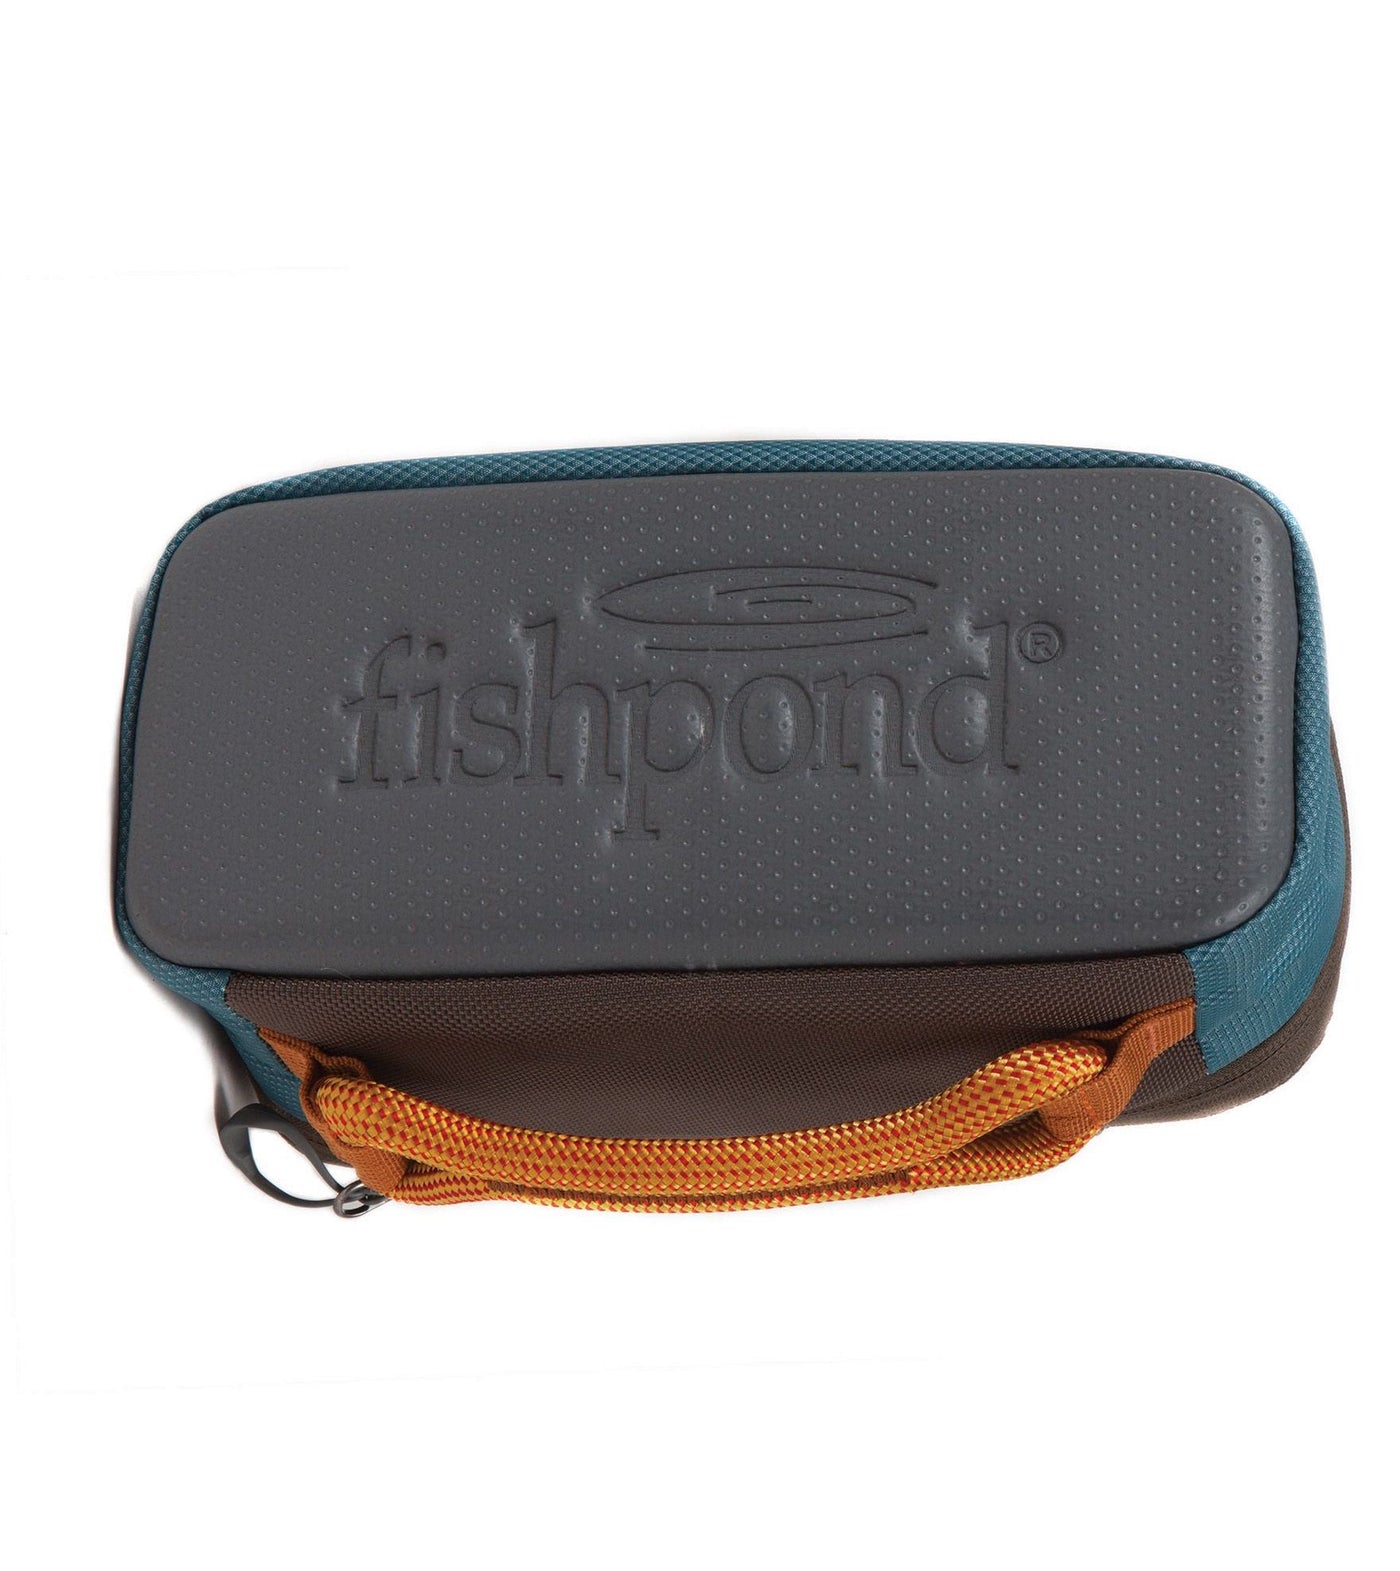 Padded leather fly reel case